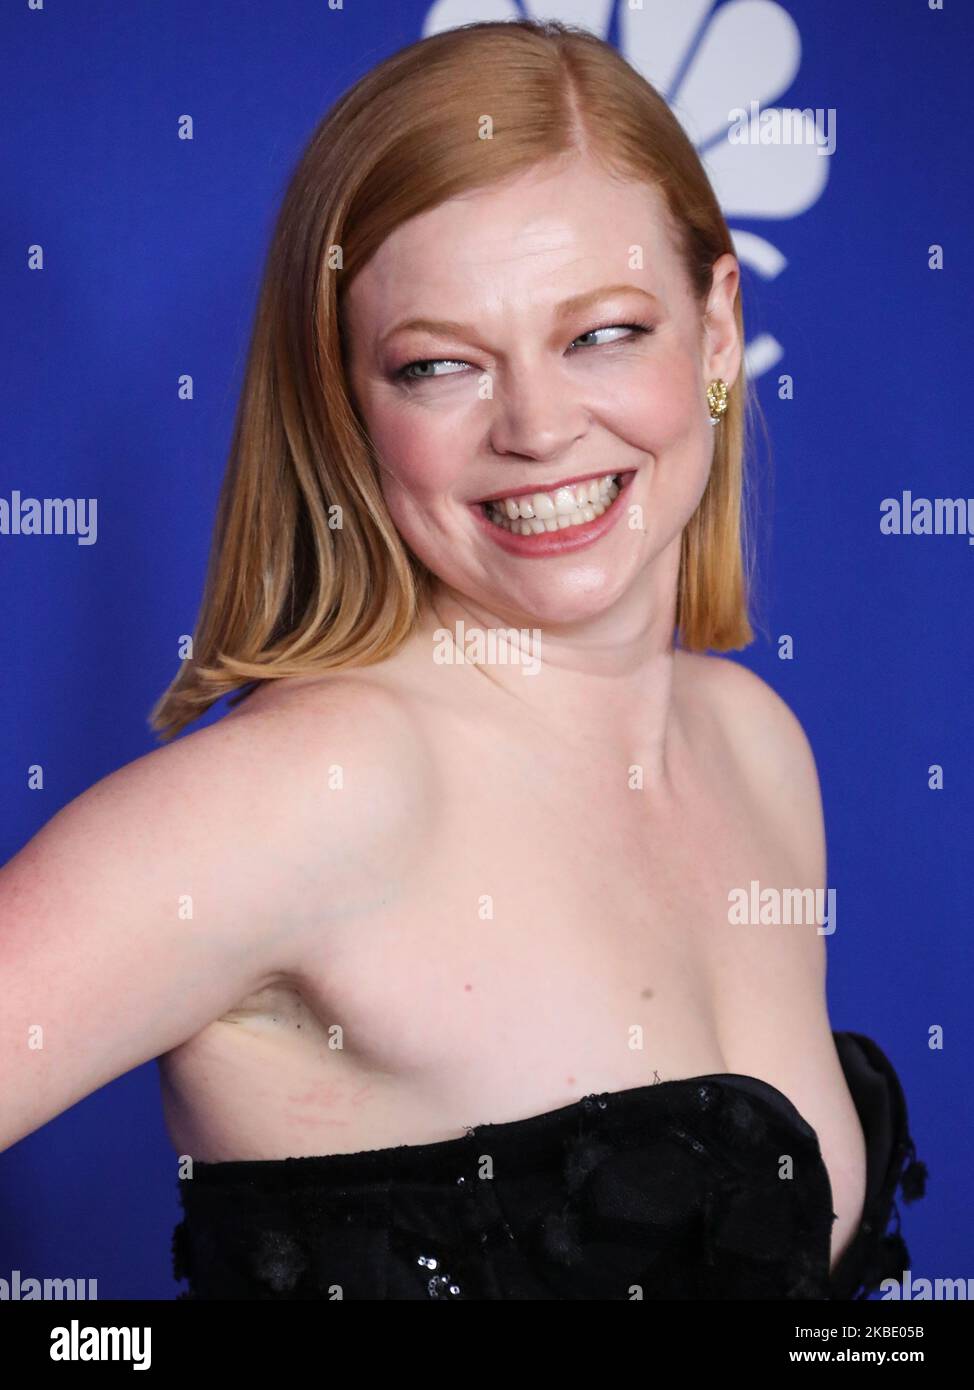 BEVERLY HILLS, LOS ANGELES, CALIFORNIA, USA - JANUARY 05: Actress Sarah Snook wearing a Christian Siriano dress poses in the press room at the 77th Annual Golden Globe Awards held at The Beverly Hilton Hotel on January 5, 2020 in Beverly Hills, Los Angeles, California, United States. (Photo by Xavier Collin/Image Press Agency/NurPhoto) Stock Photo